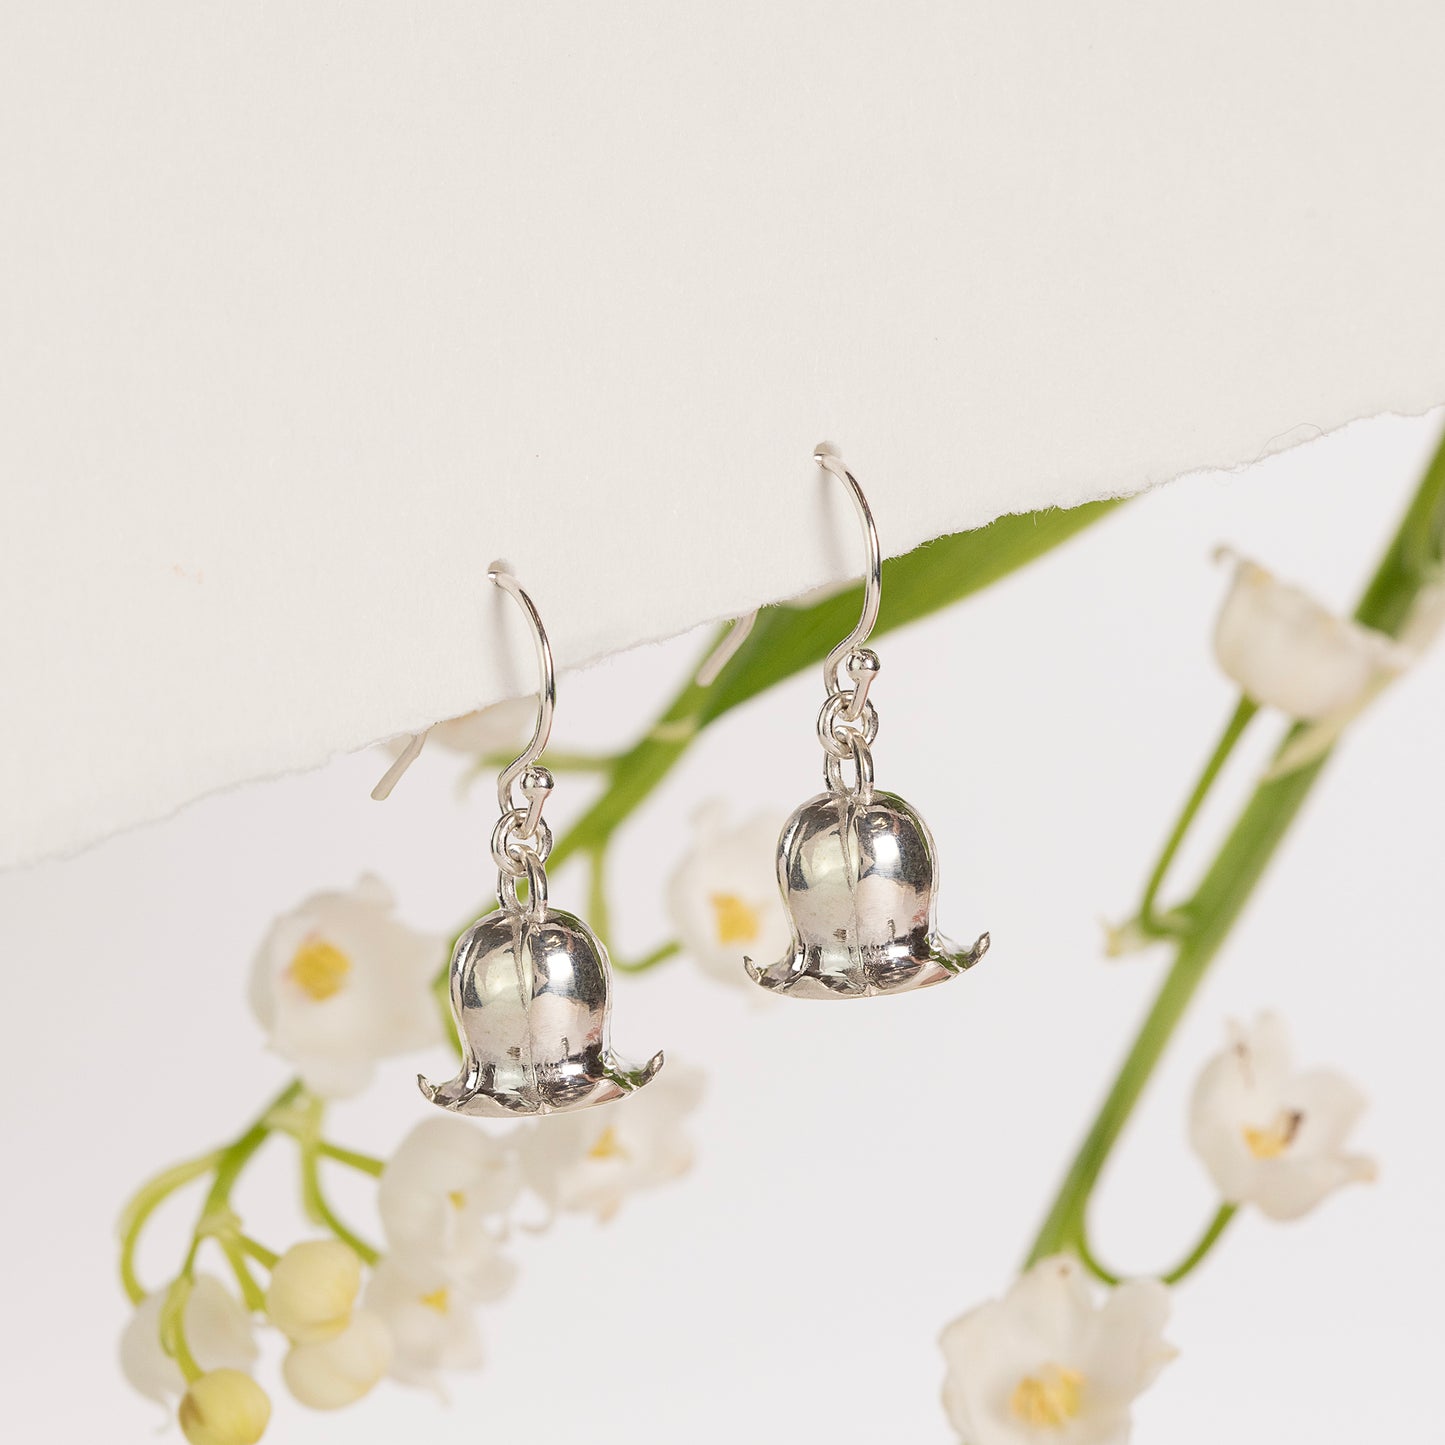 May Birth Flower Earrings - Lily of the Valley - Silver